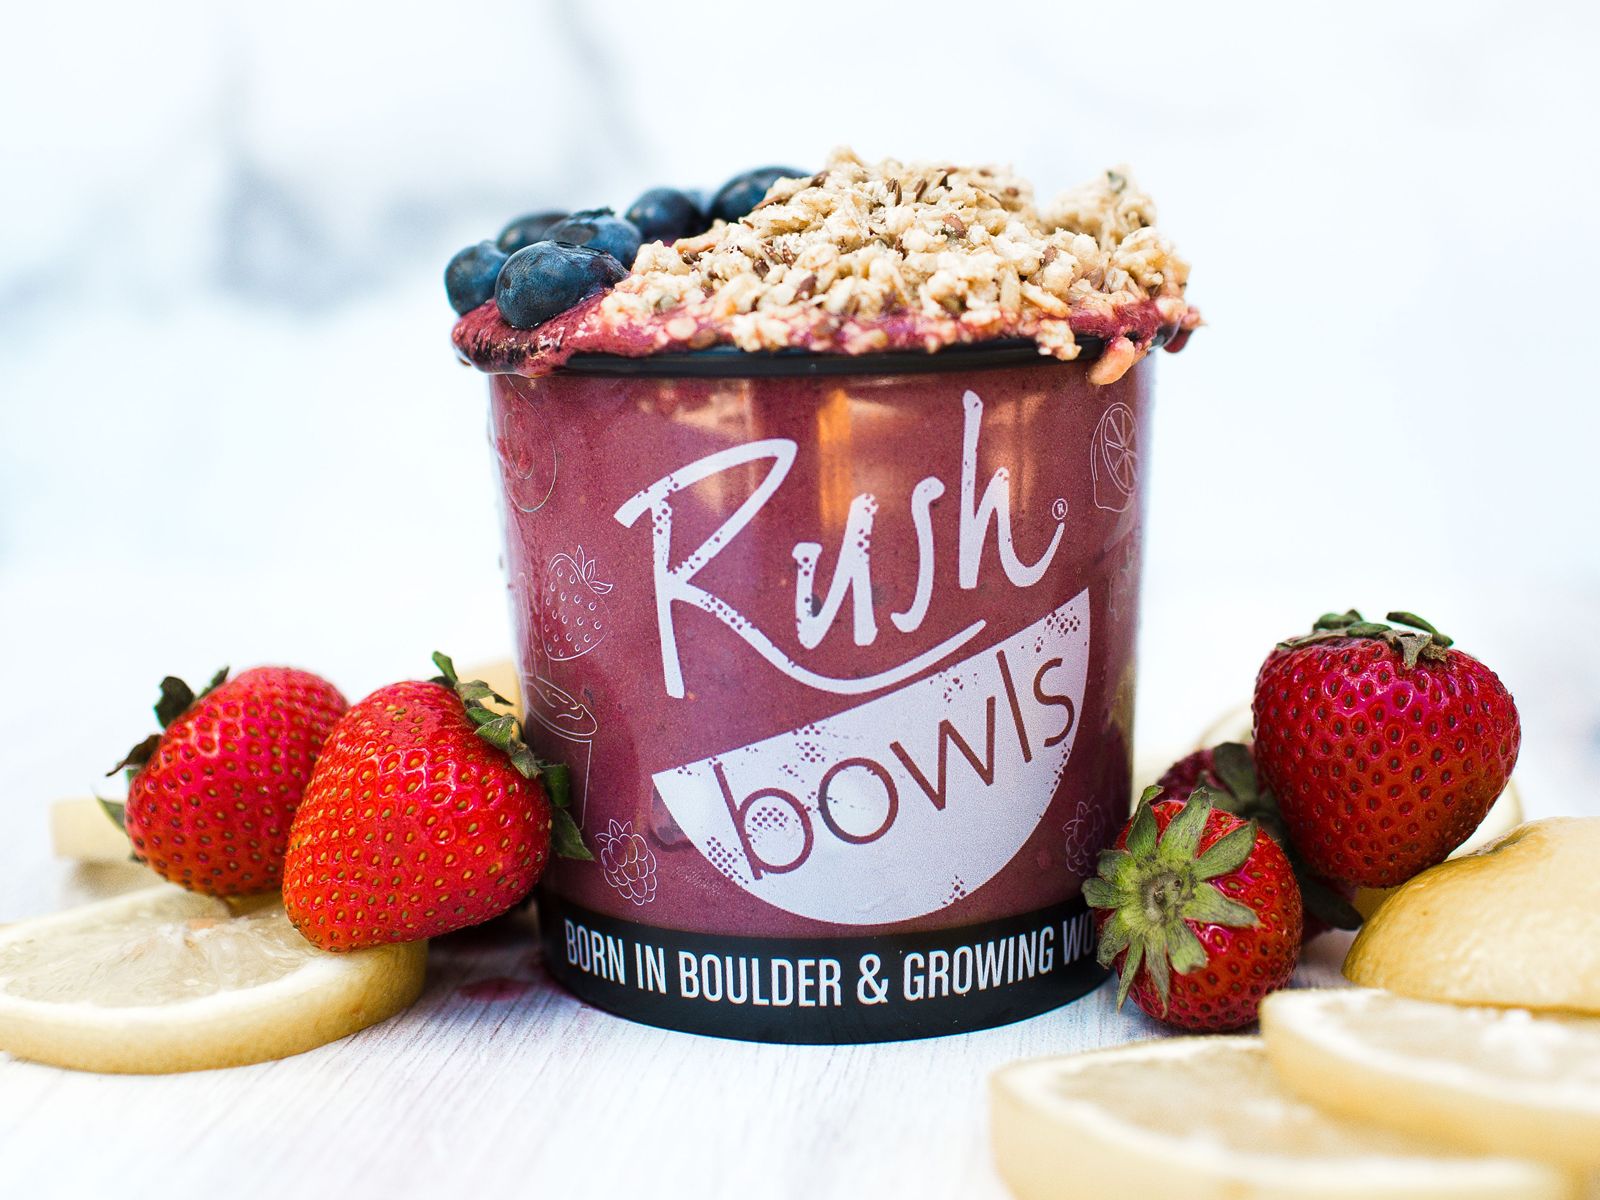 Rush Bowls Continues National Expansion Through Innovation and Entrance into New Markets